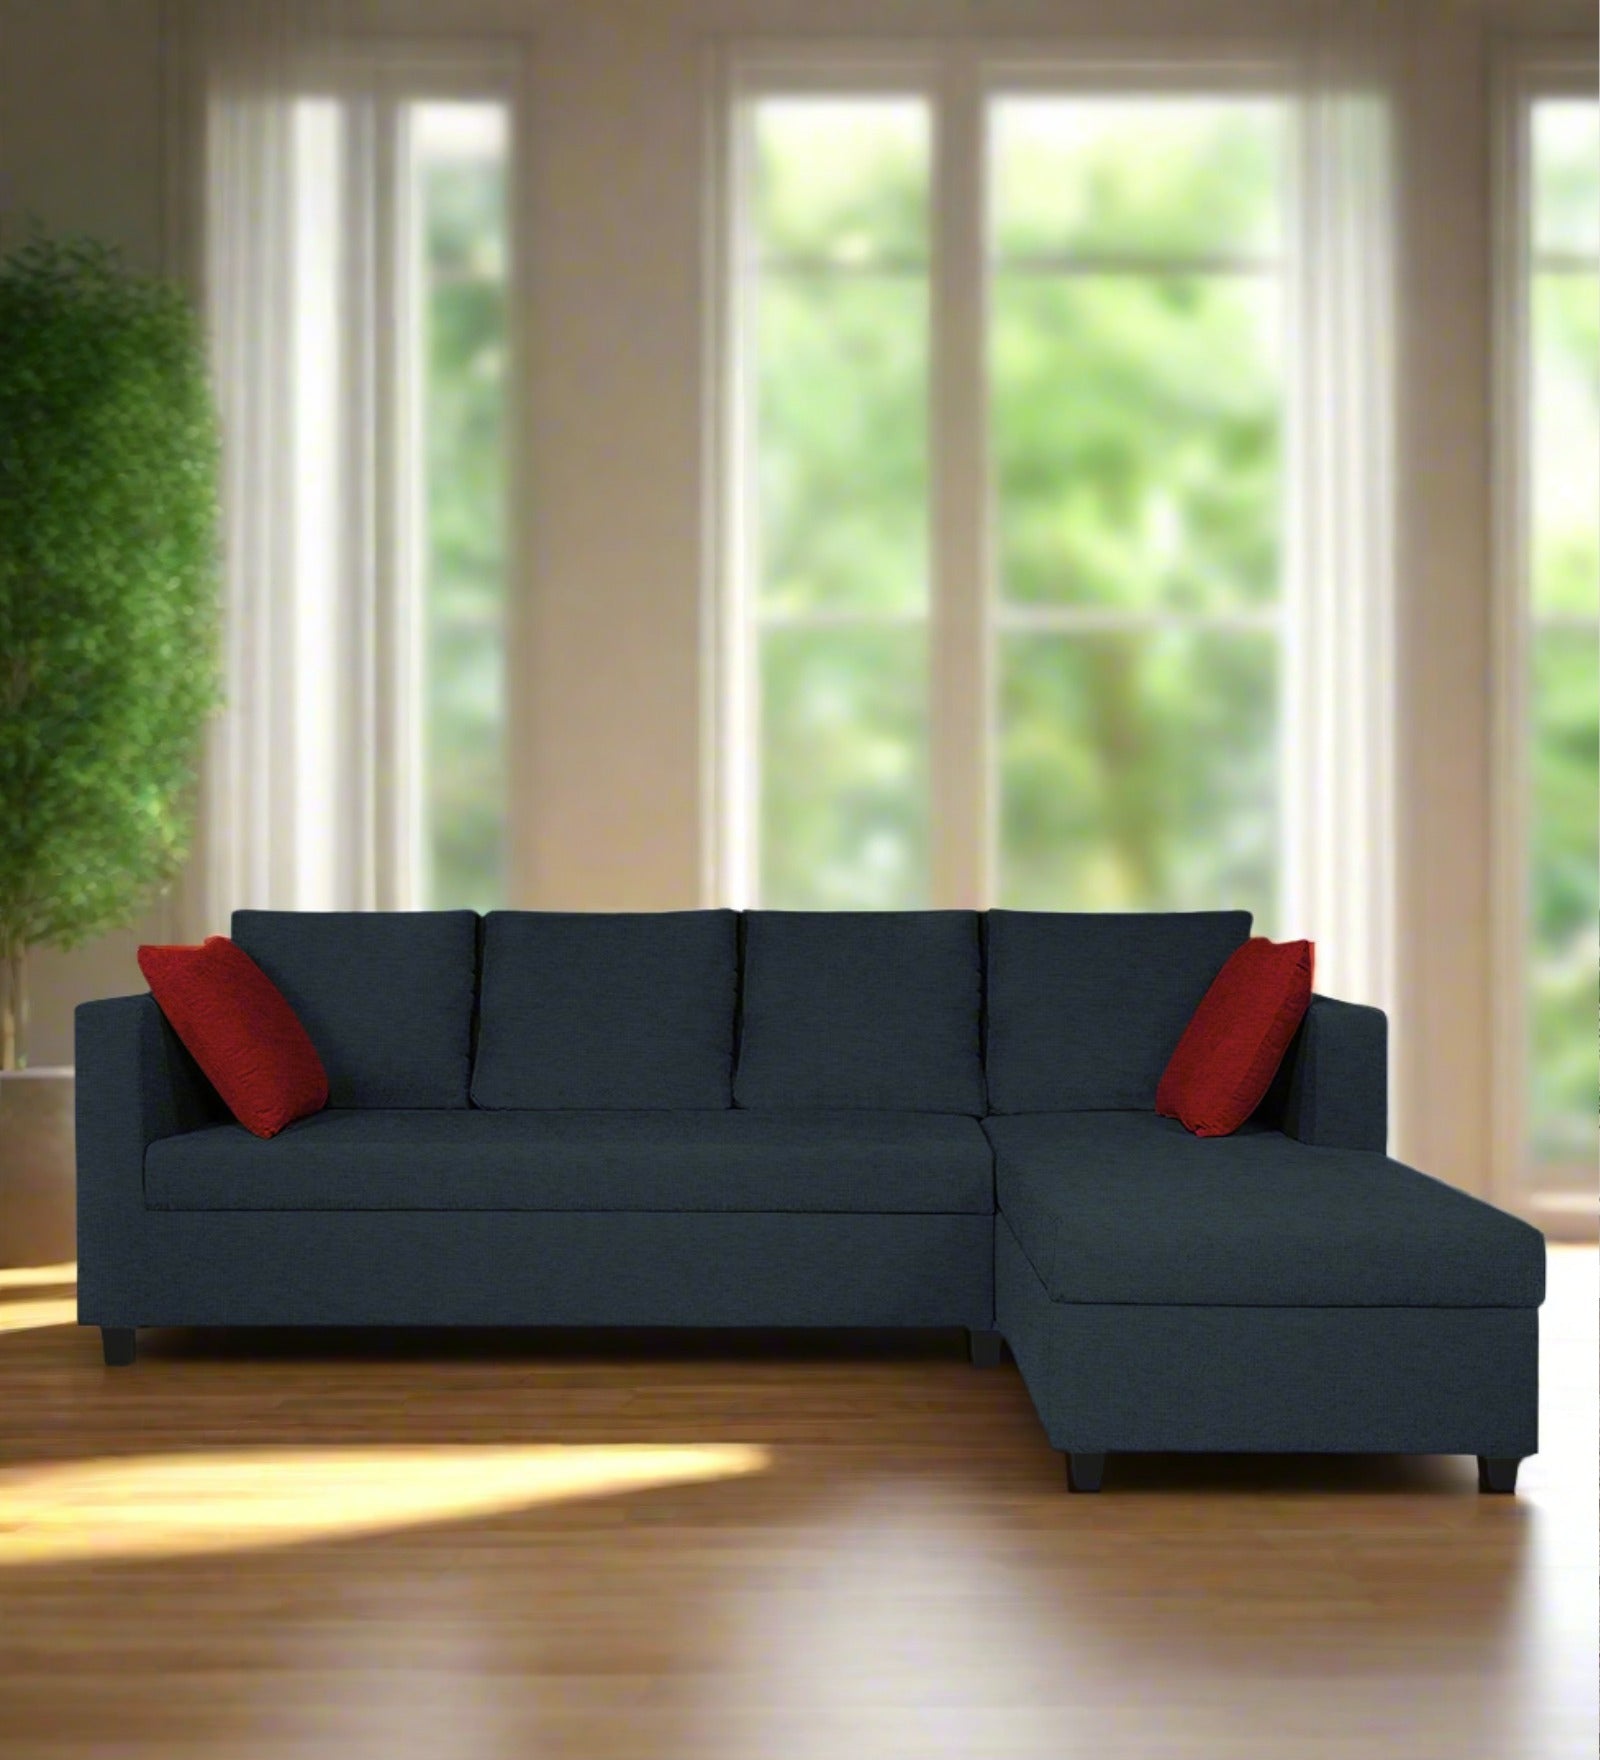 Nebula Fabric LHS Sectional Sofa (3+Lounger) in Denim Blue Colour